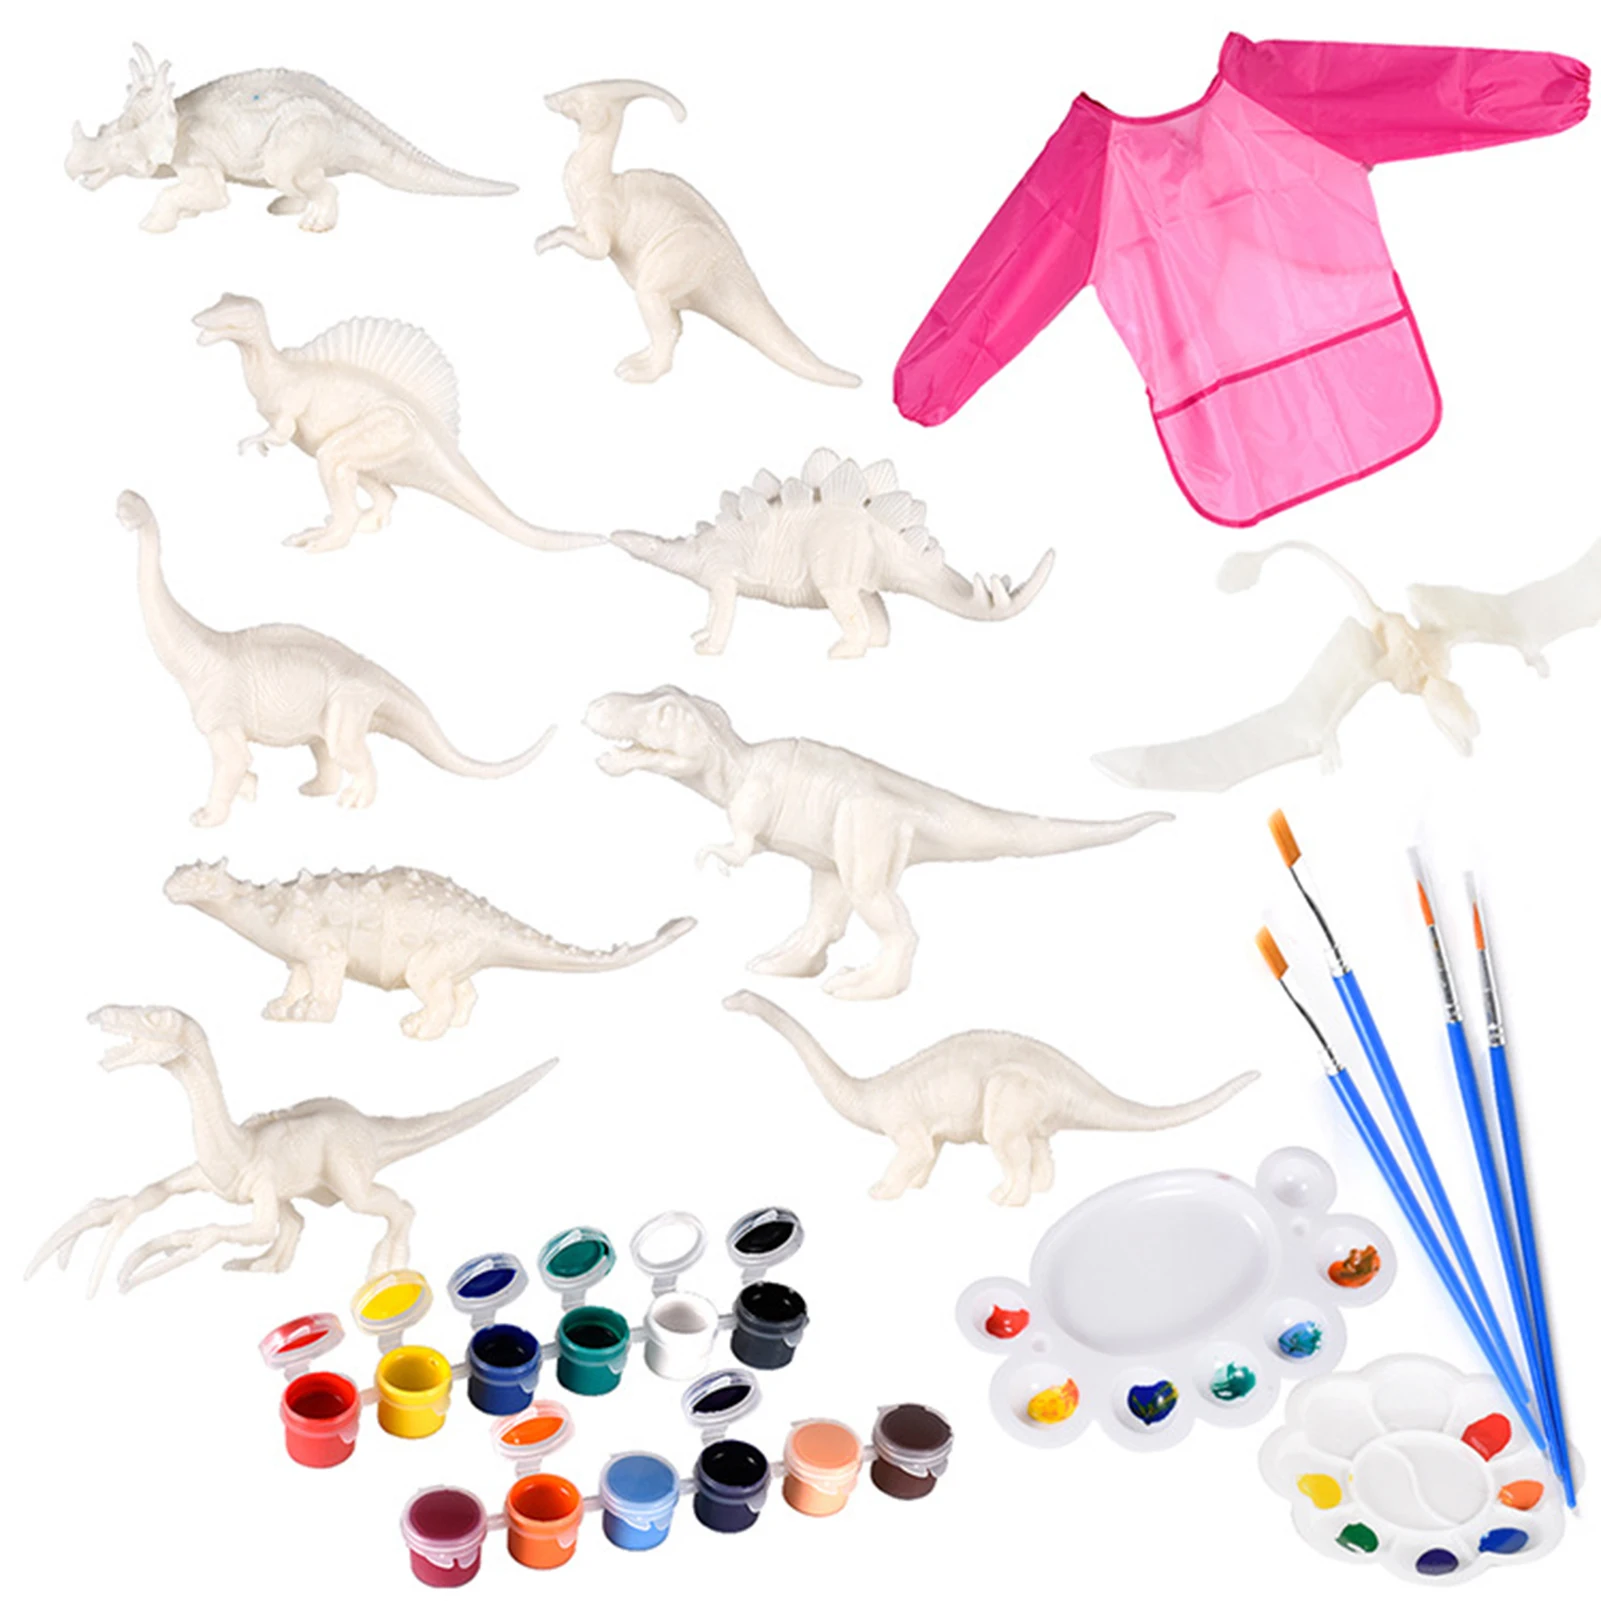 

Dinosaur Painting Kit For Kids 3D Dinosaurs Toys DIY Drawing Tools Set Children Art Crafts With Brushes Apron Birthday Gift